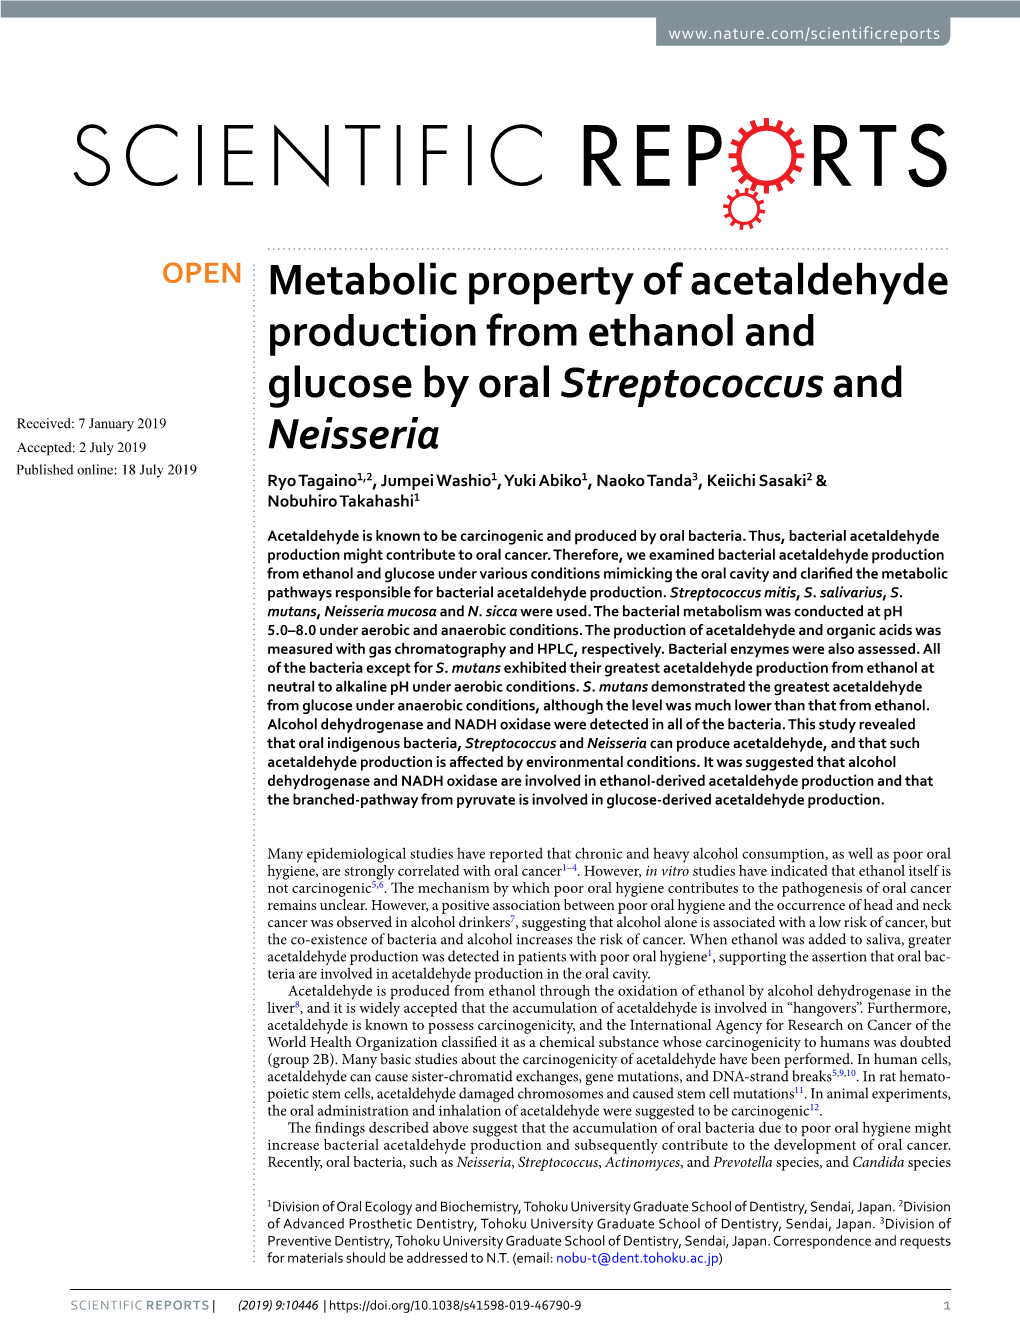 Metabolic Property of Acetaldehyde Production from Ethanol and Glucose by Oral Streptococcus and Neisseria